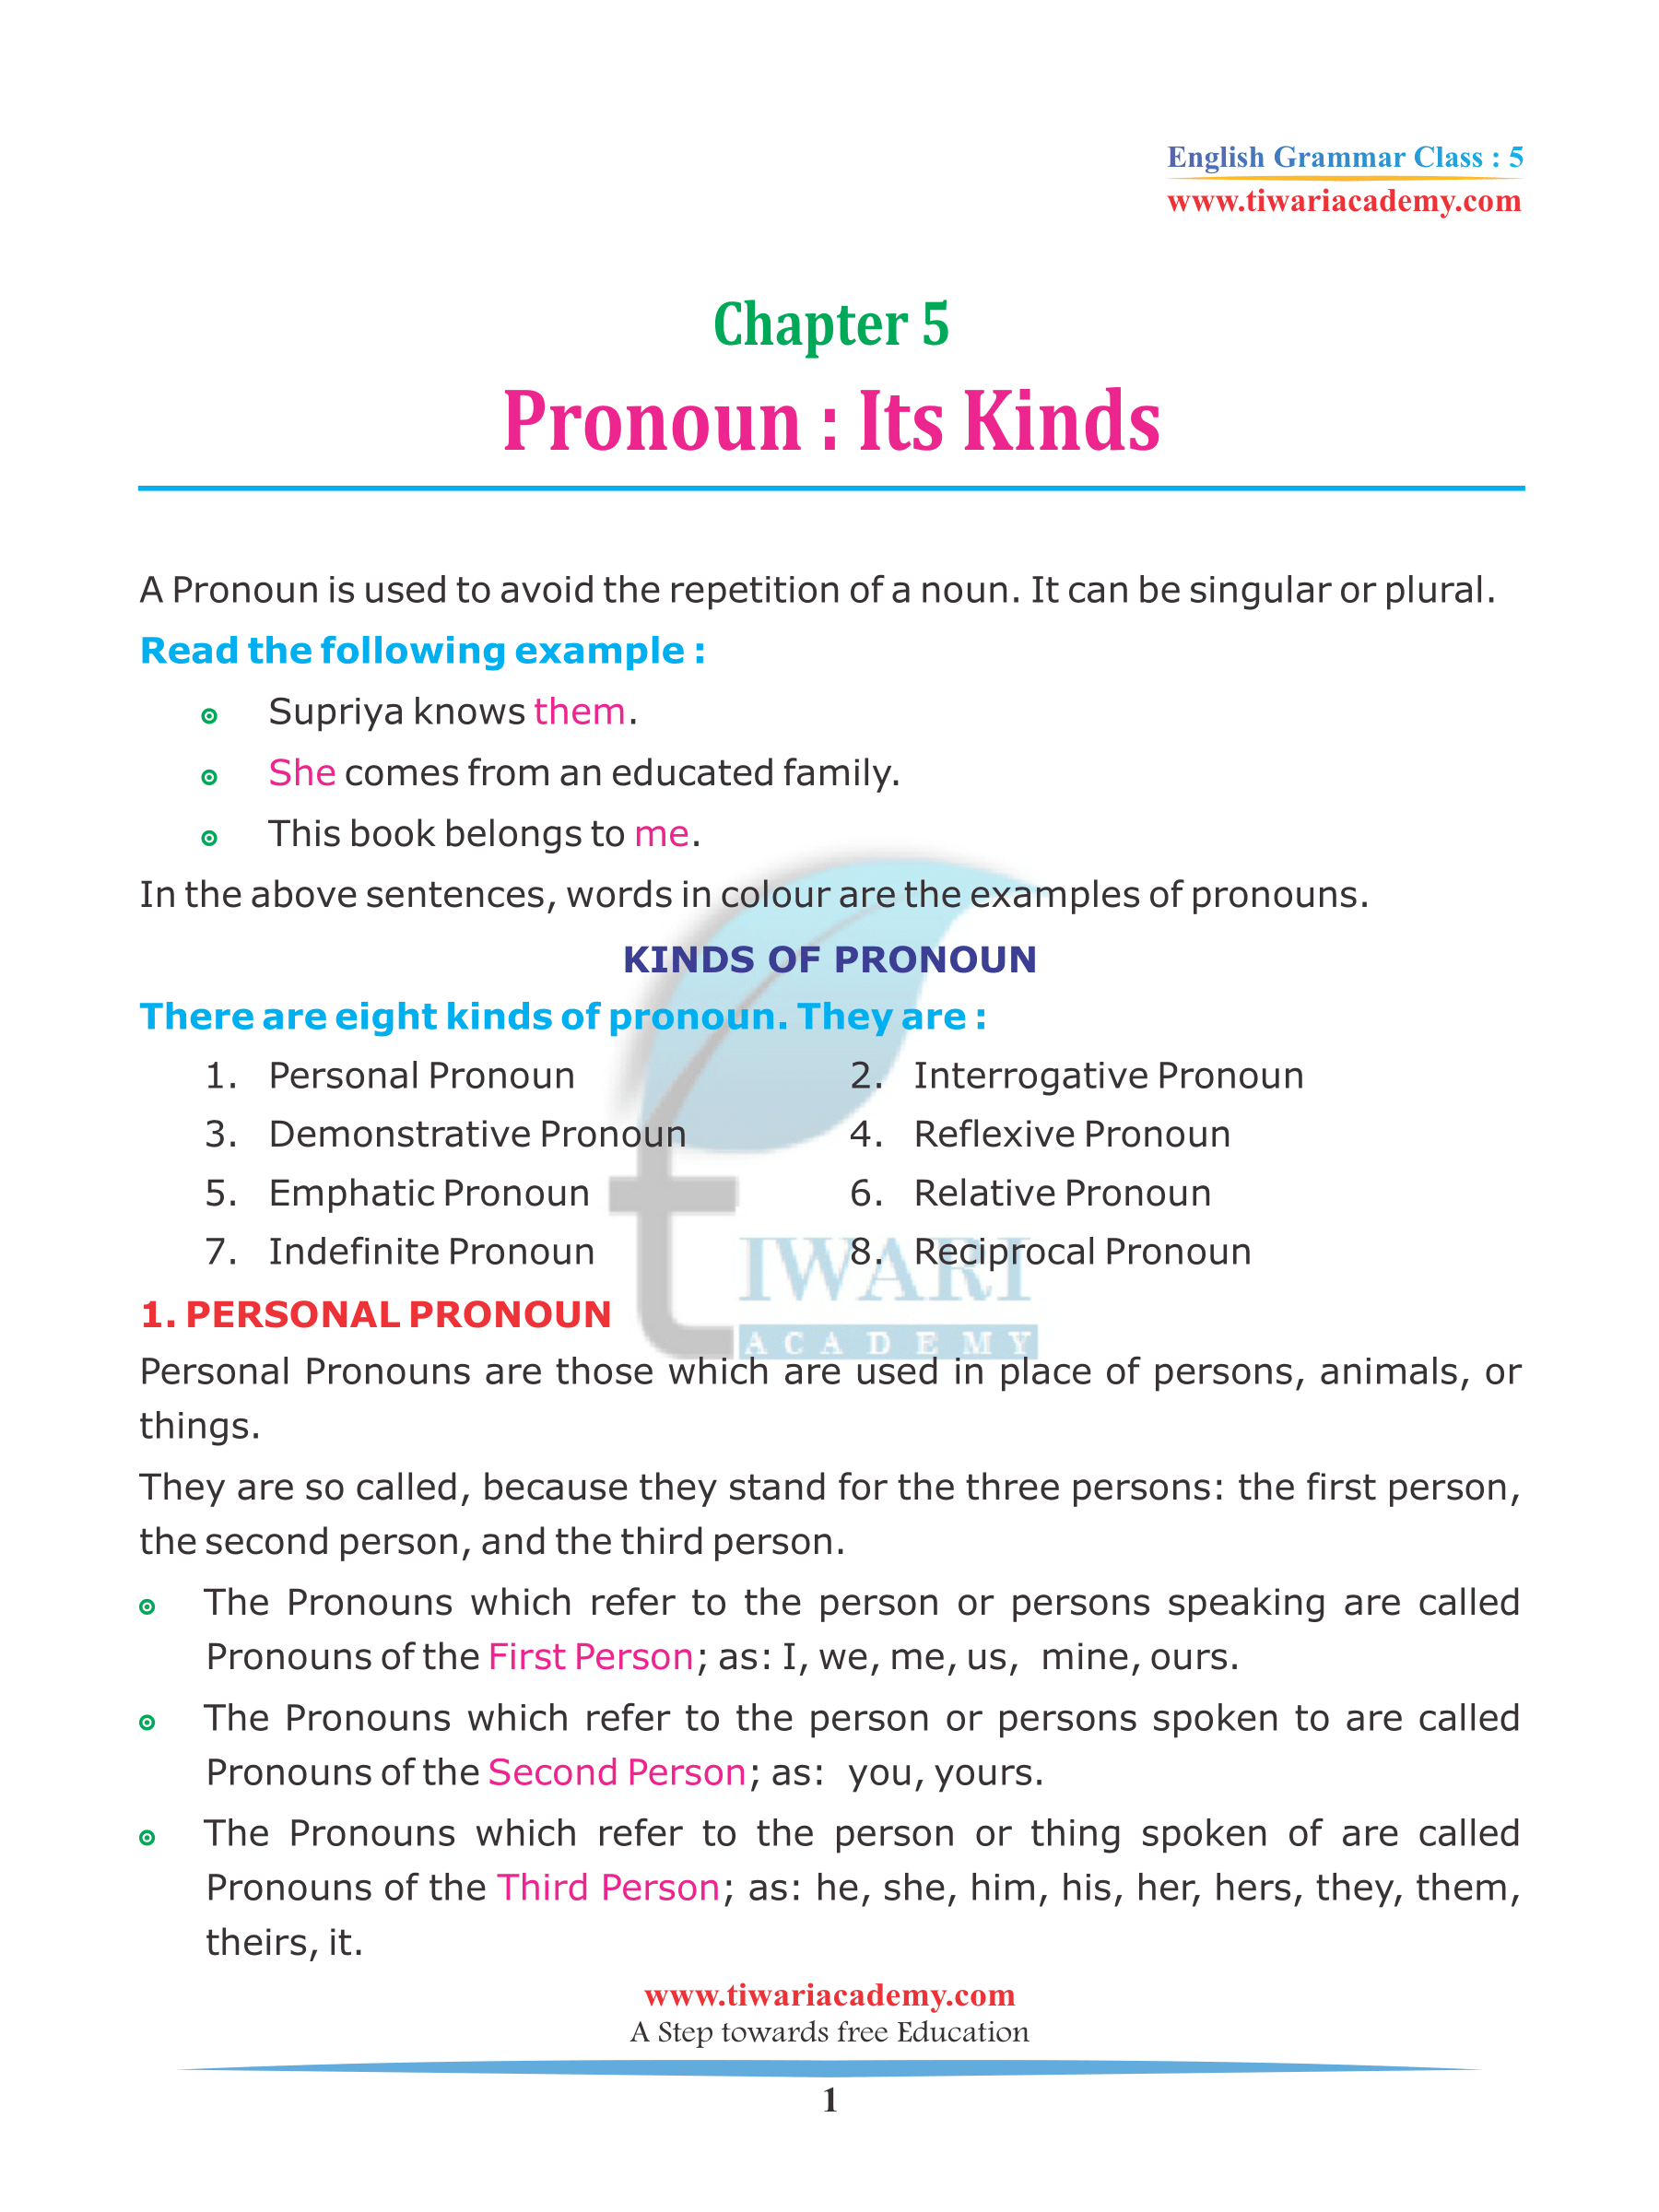 Class 5 English Grammar Chapter 5 Pronoun and its kinds for 2022-2023.